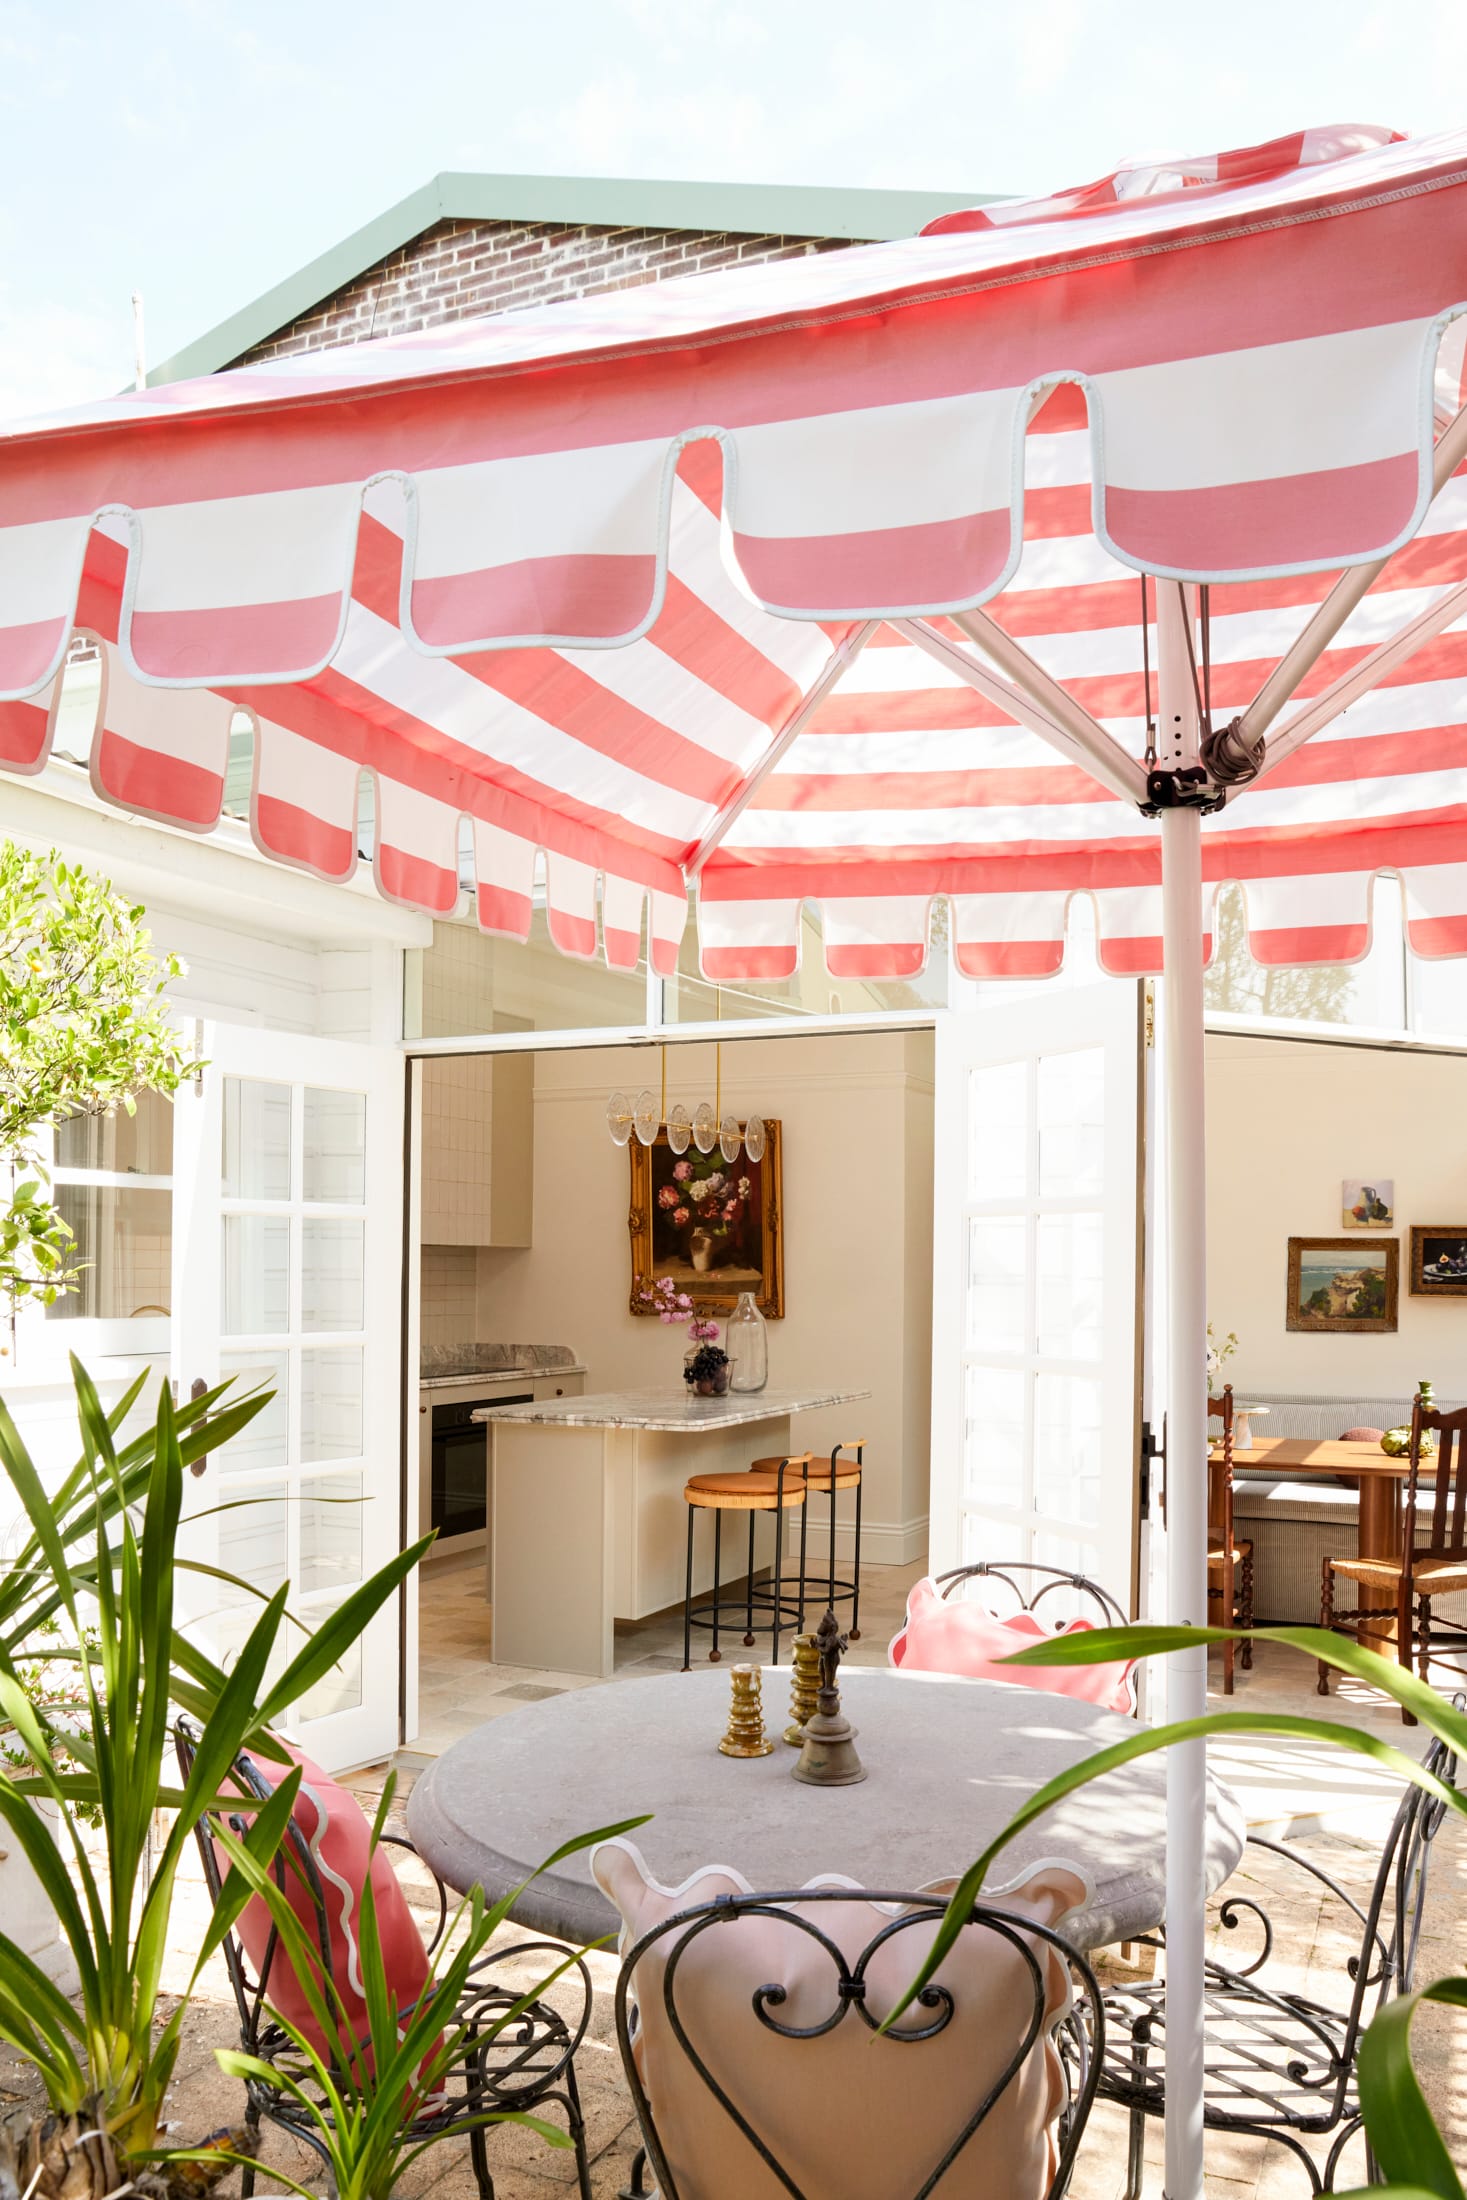 Drummoyne House by studio BARBARA. Photography by Jacqui Turk.  Outdoor dining setting with large pink and white striped umbrella. Wrought iron vintage dining chairs surrounded by green plants.